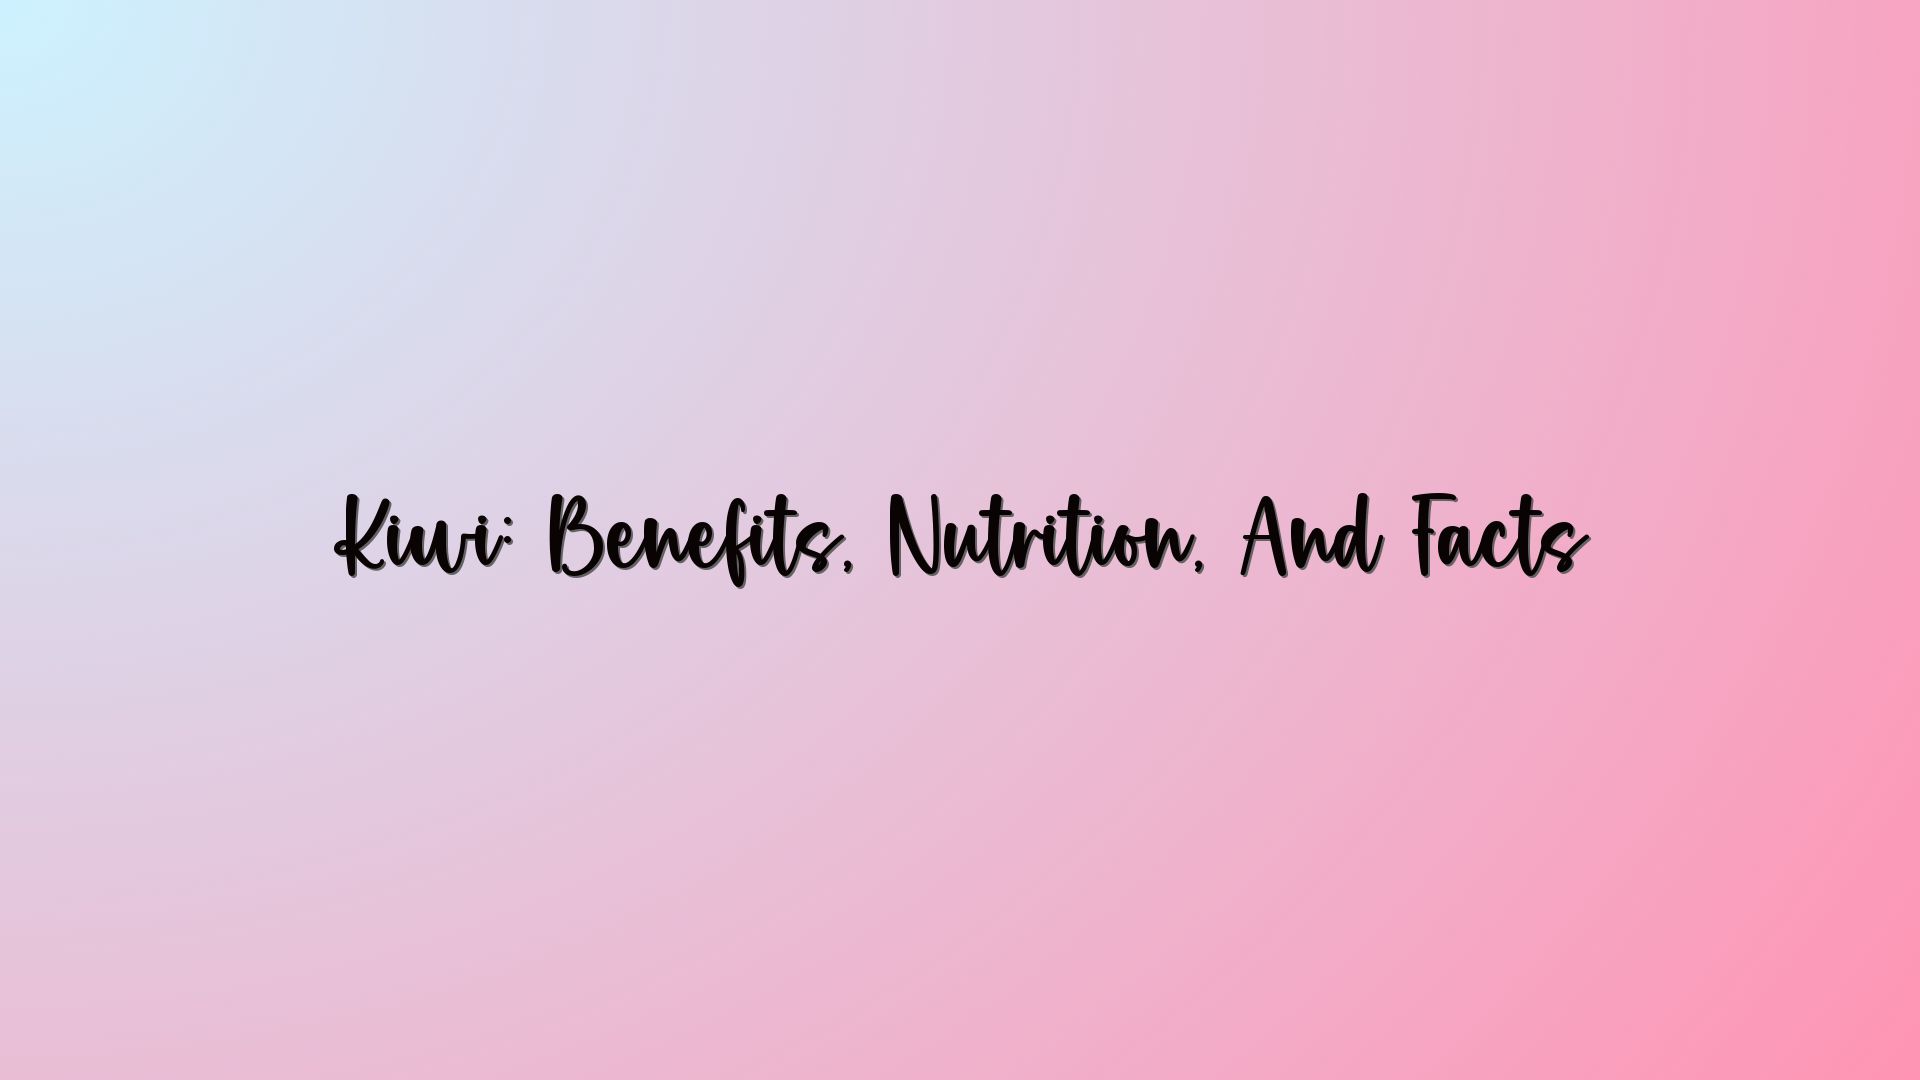 Kiwi: Benefits, Nutrition, And Facts